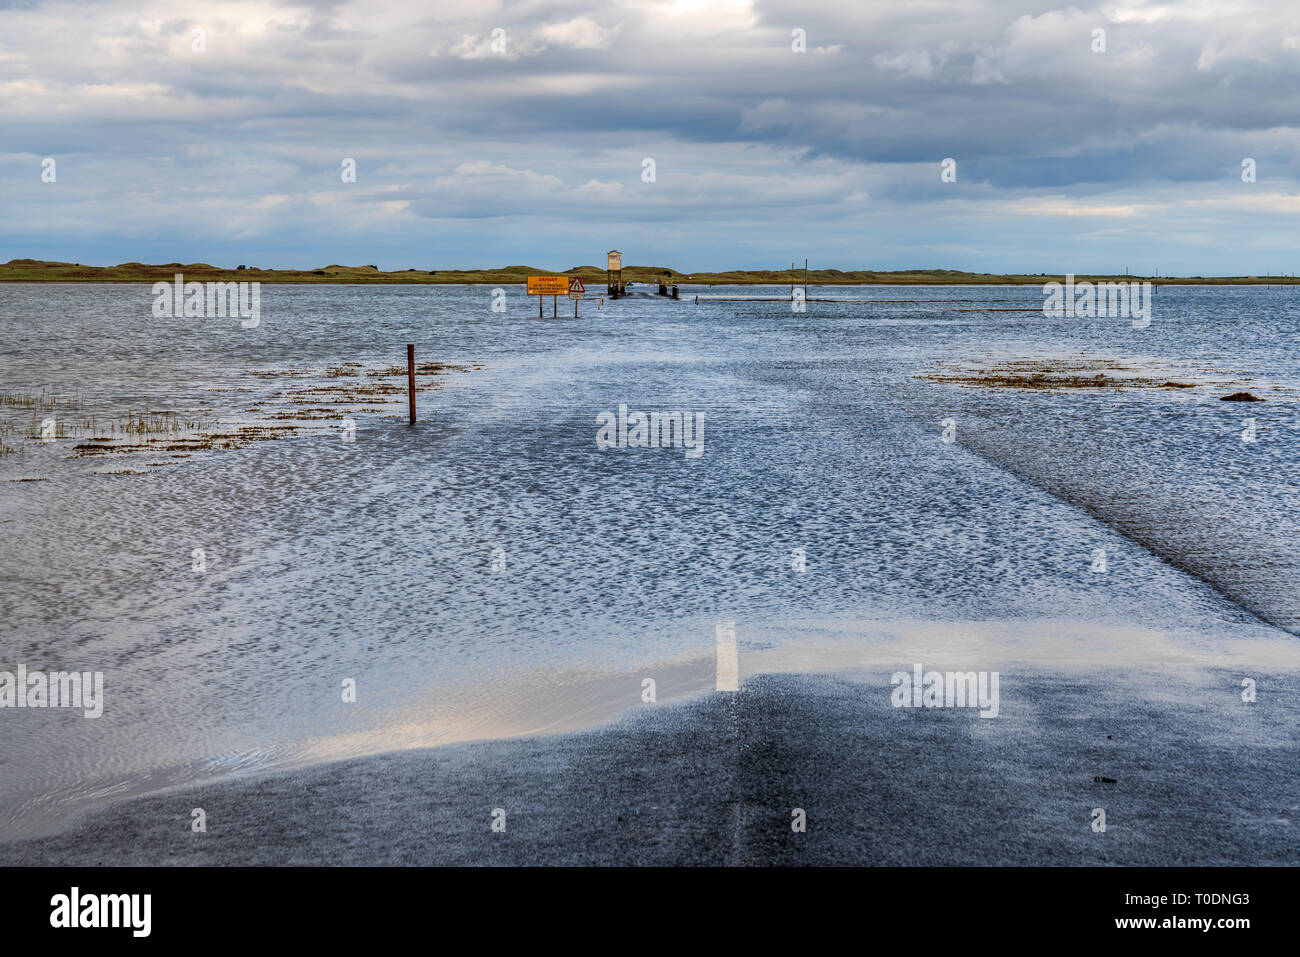 Near Beal, Northumberland, England, UK - September 08, 2018: Flooded Road to the Holy Island of Lindisfarne with a car waiting Stock Photo